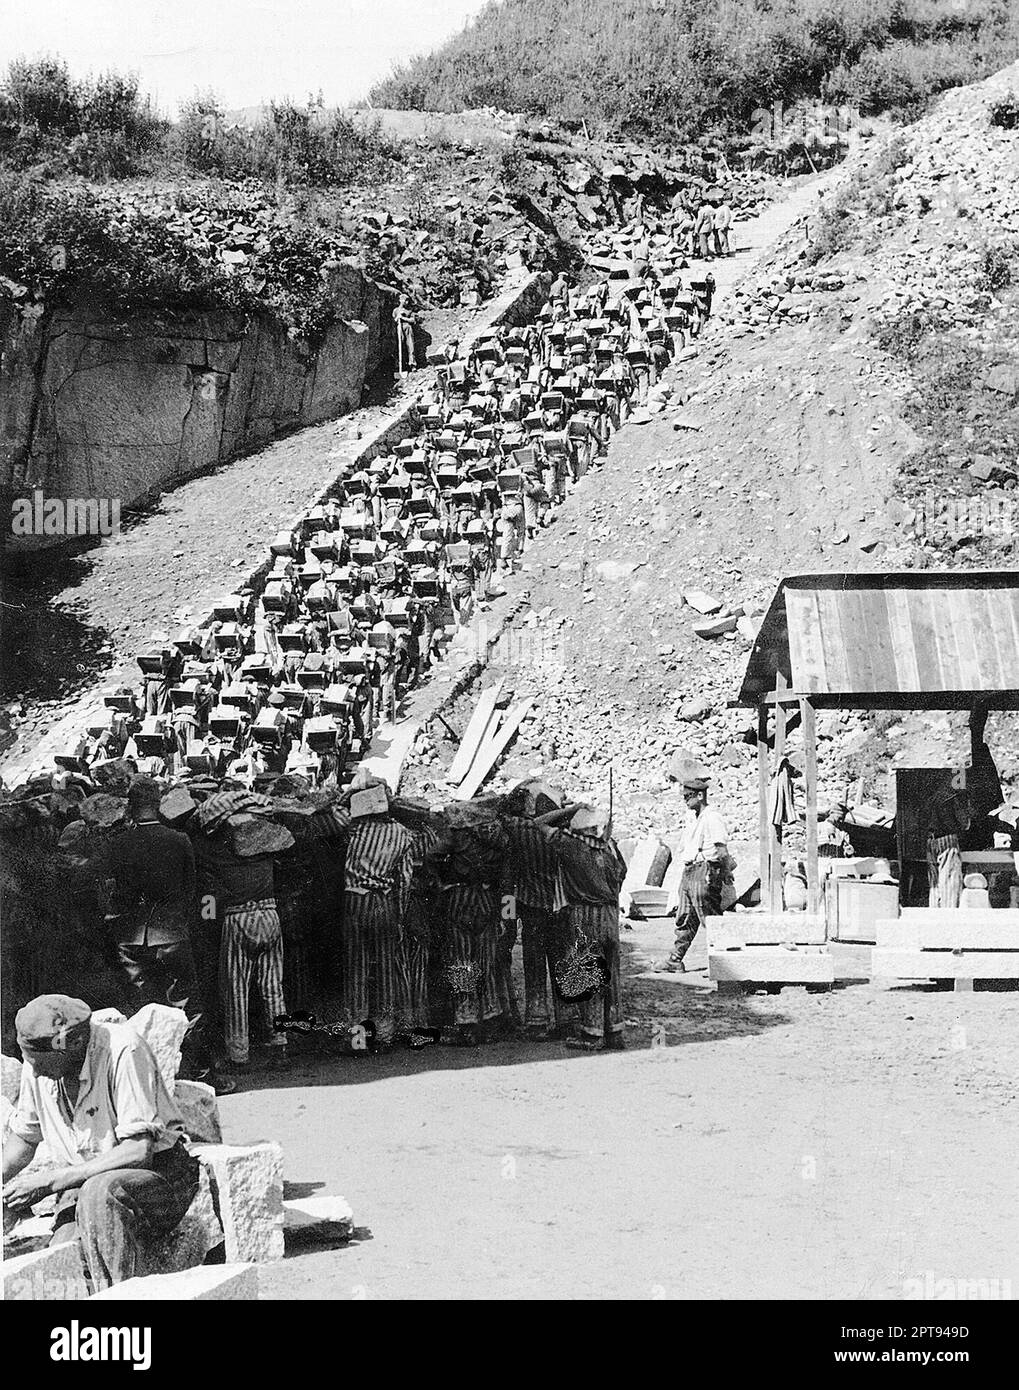 Bundesarchiv, Bild 192-269 / CC-BY-SA 3.0 The 'Stairs of Death' (Todesstiege) at Mauthausen-Gusen concentration camp. The prisoners, wearing the striped prison uniform, were forced to carry granite blocks up 186 steps to the top of the Wiener Graben quarry. Death and fearful injuries were daily events, and among the prison camps Mauthausen had a feared reputation. Stock Photo